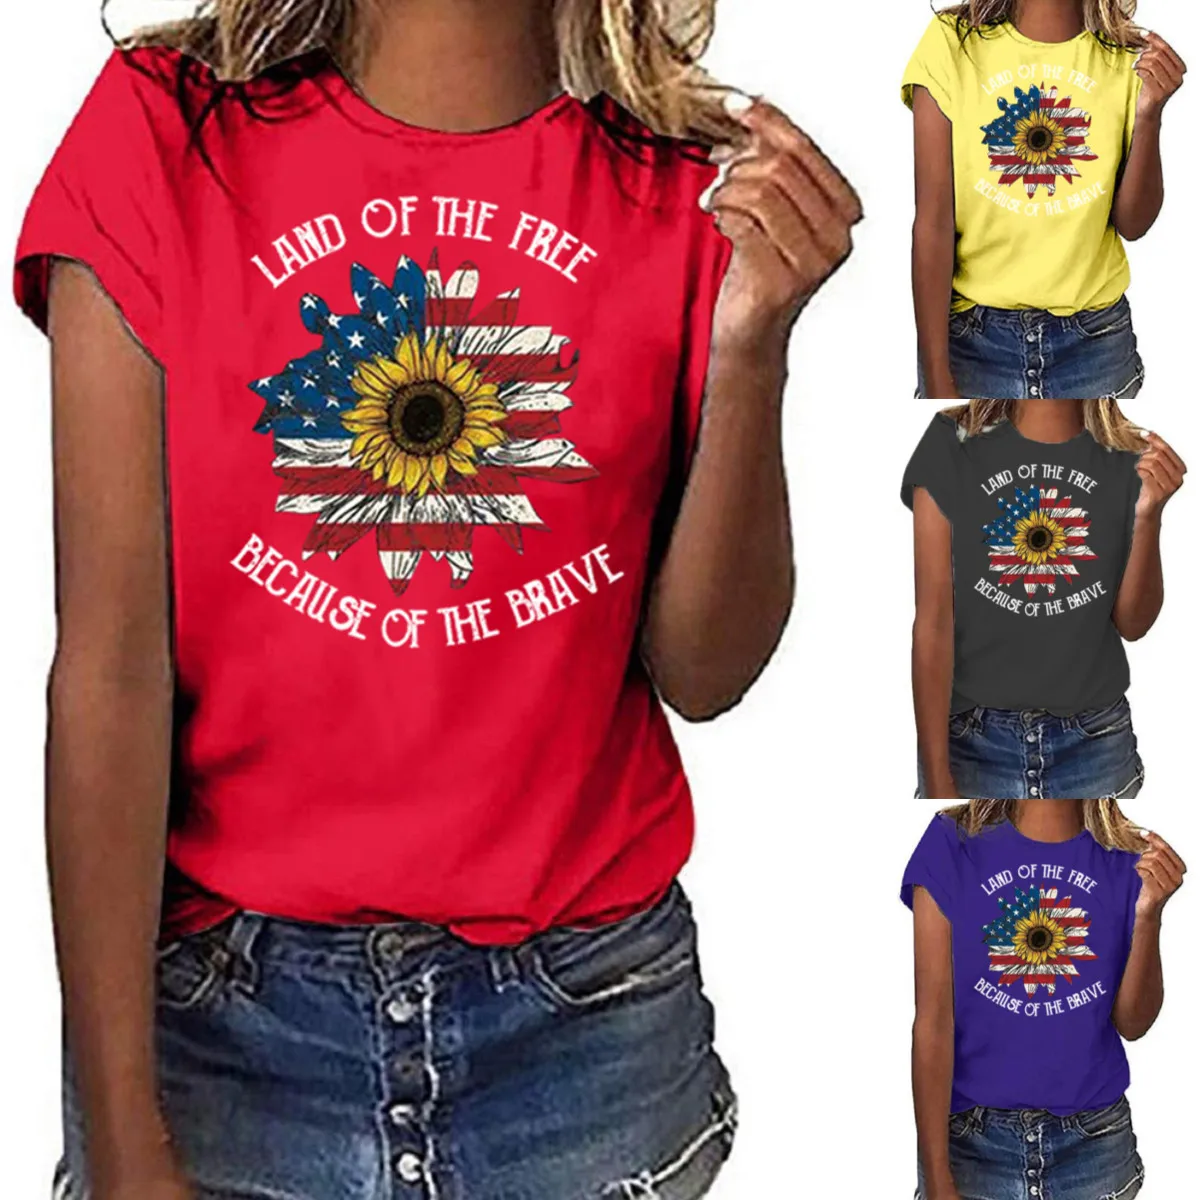 

Women's short sleeve T-shirts are hot sellers in Europe and the United States pro choice shirts for women women clothes